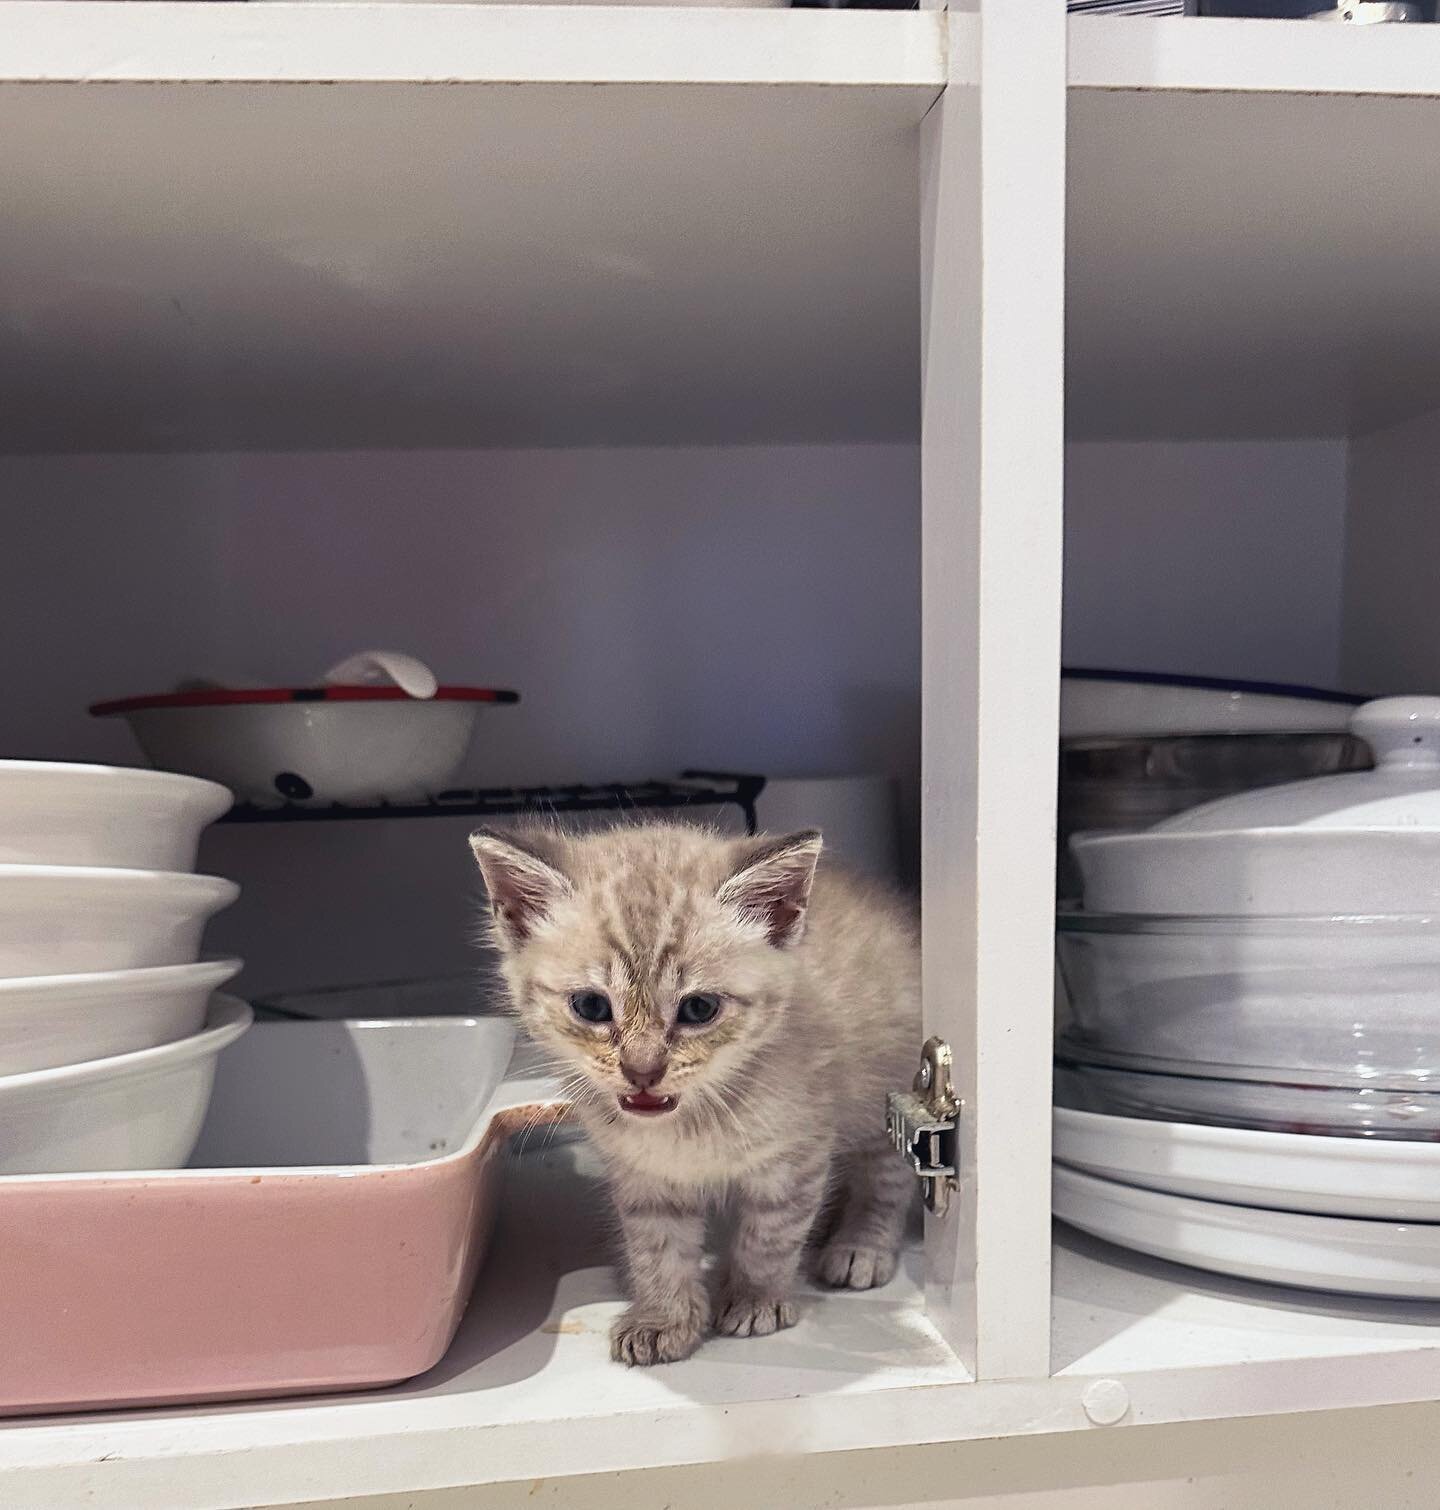 Here at FKOM we like to put our kittens to work. Valentina here is helping her foster mum empty the dishwasher and she&rsquo;s doing a mighty fine job! 

What a great skill to put on her adoption profile! 

#cats #catsofinstagram #catstagram #kittens